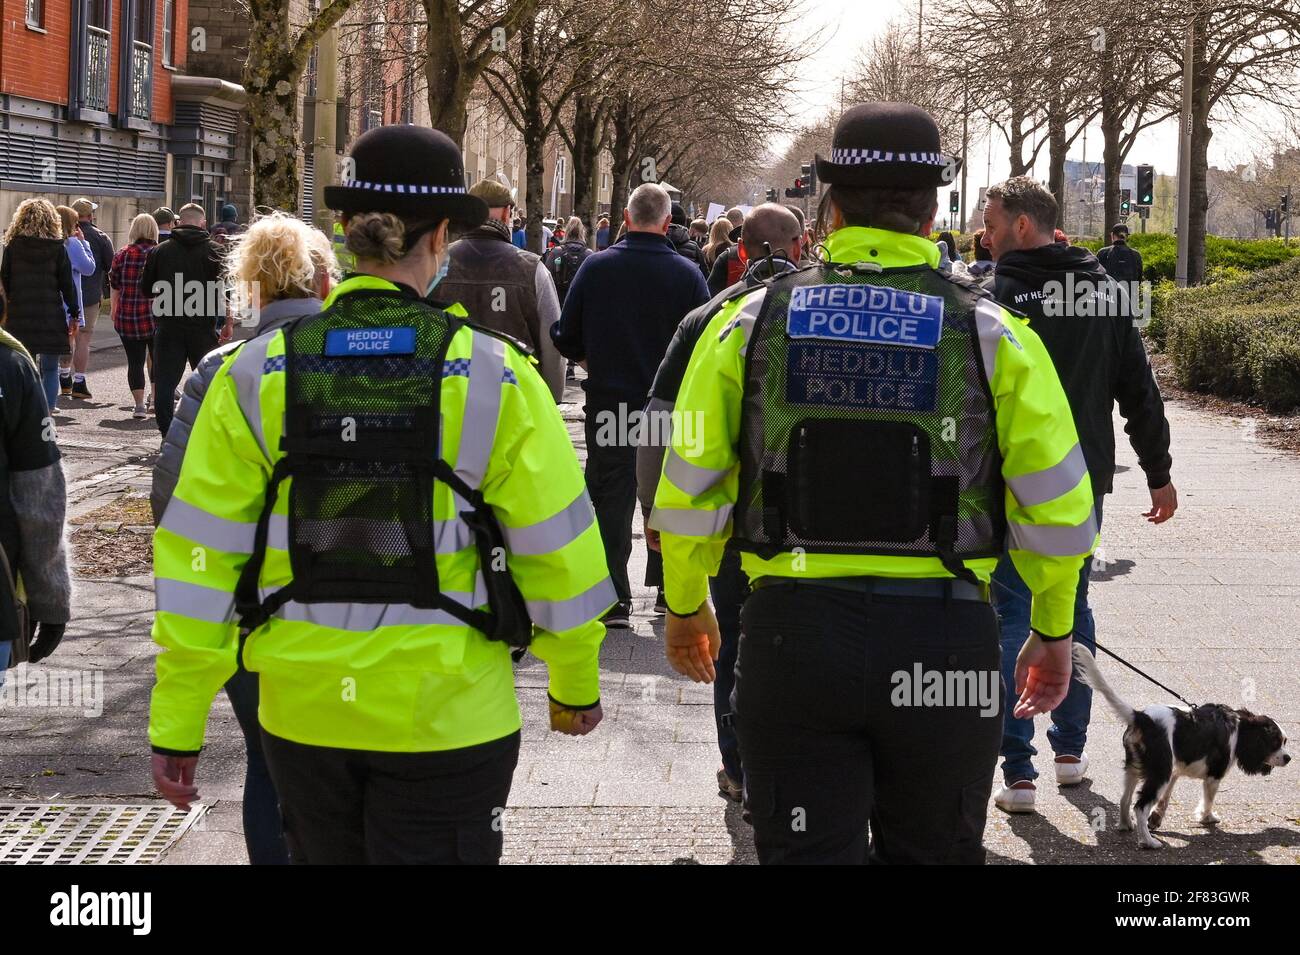 Cardiff, Wales - April 2021: Two police officers escorting a crowd of people at a public march in Cardiff Stock Photo